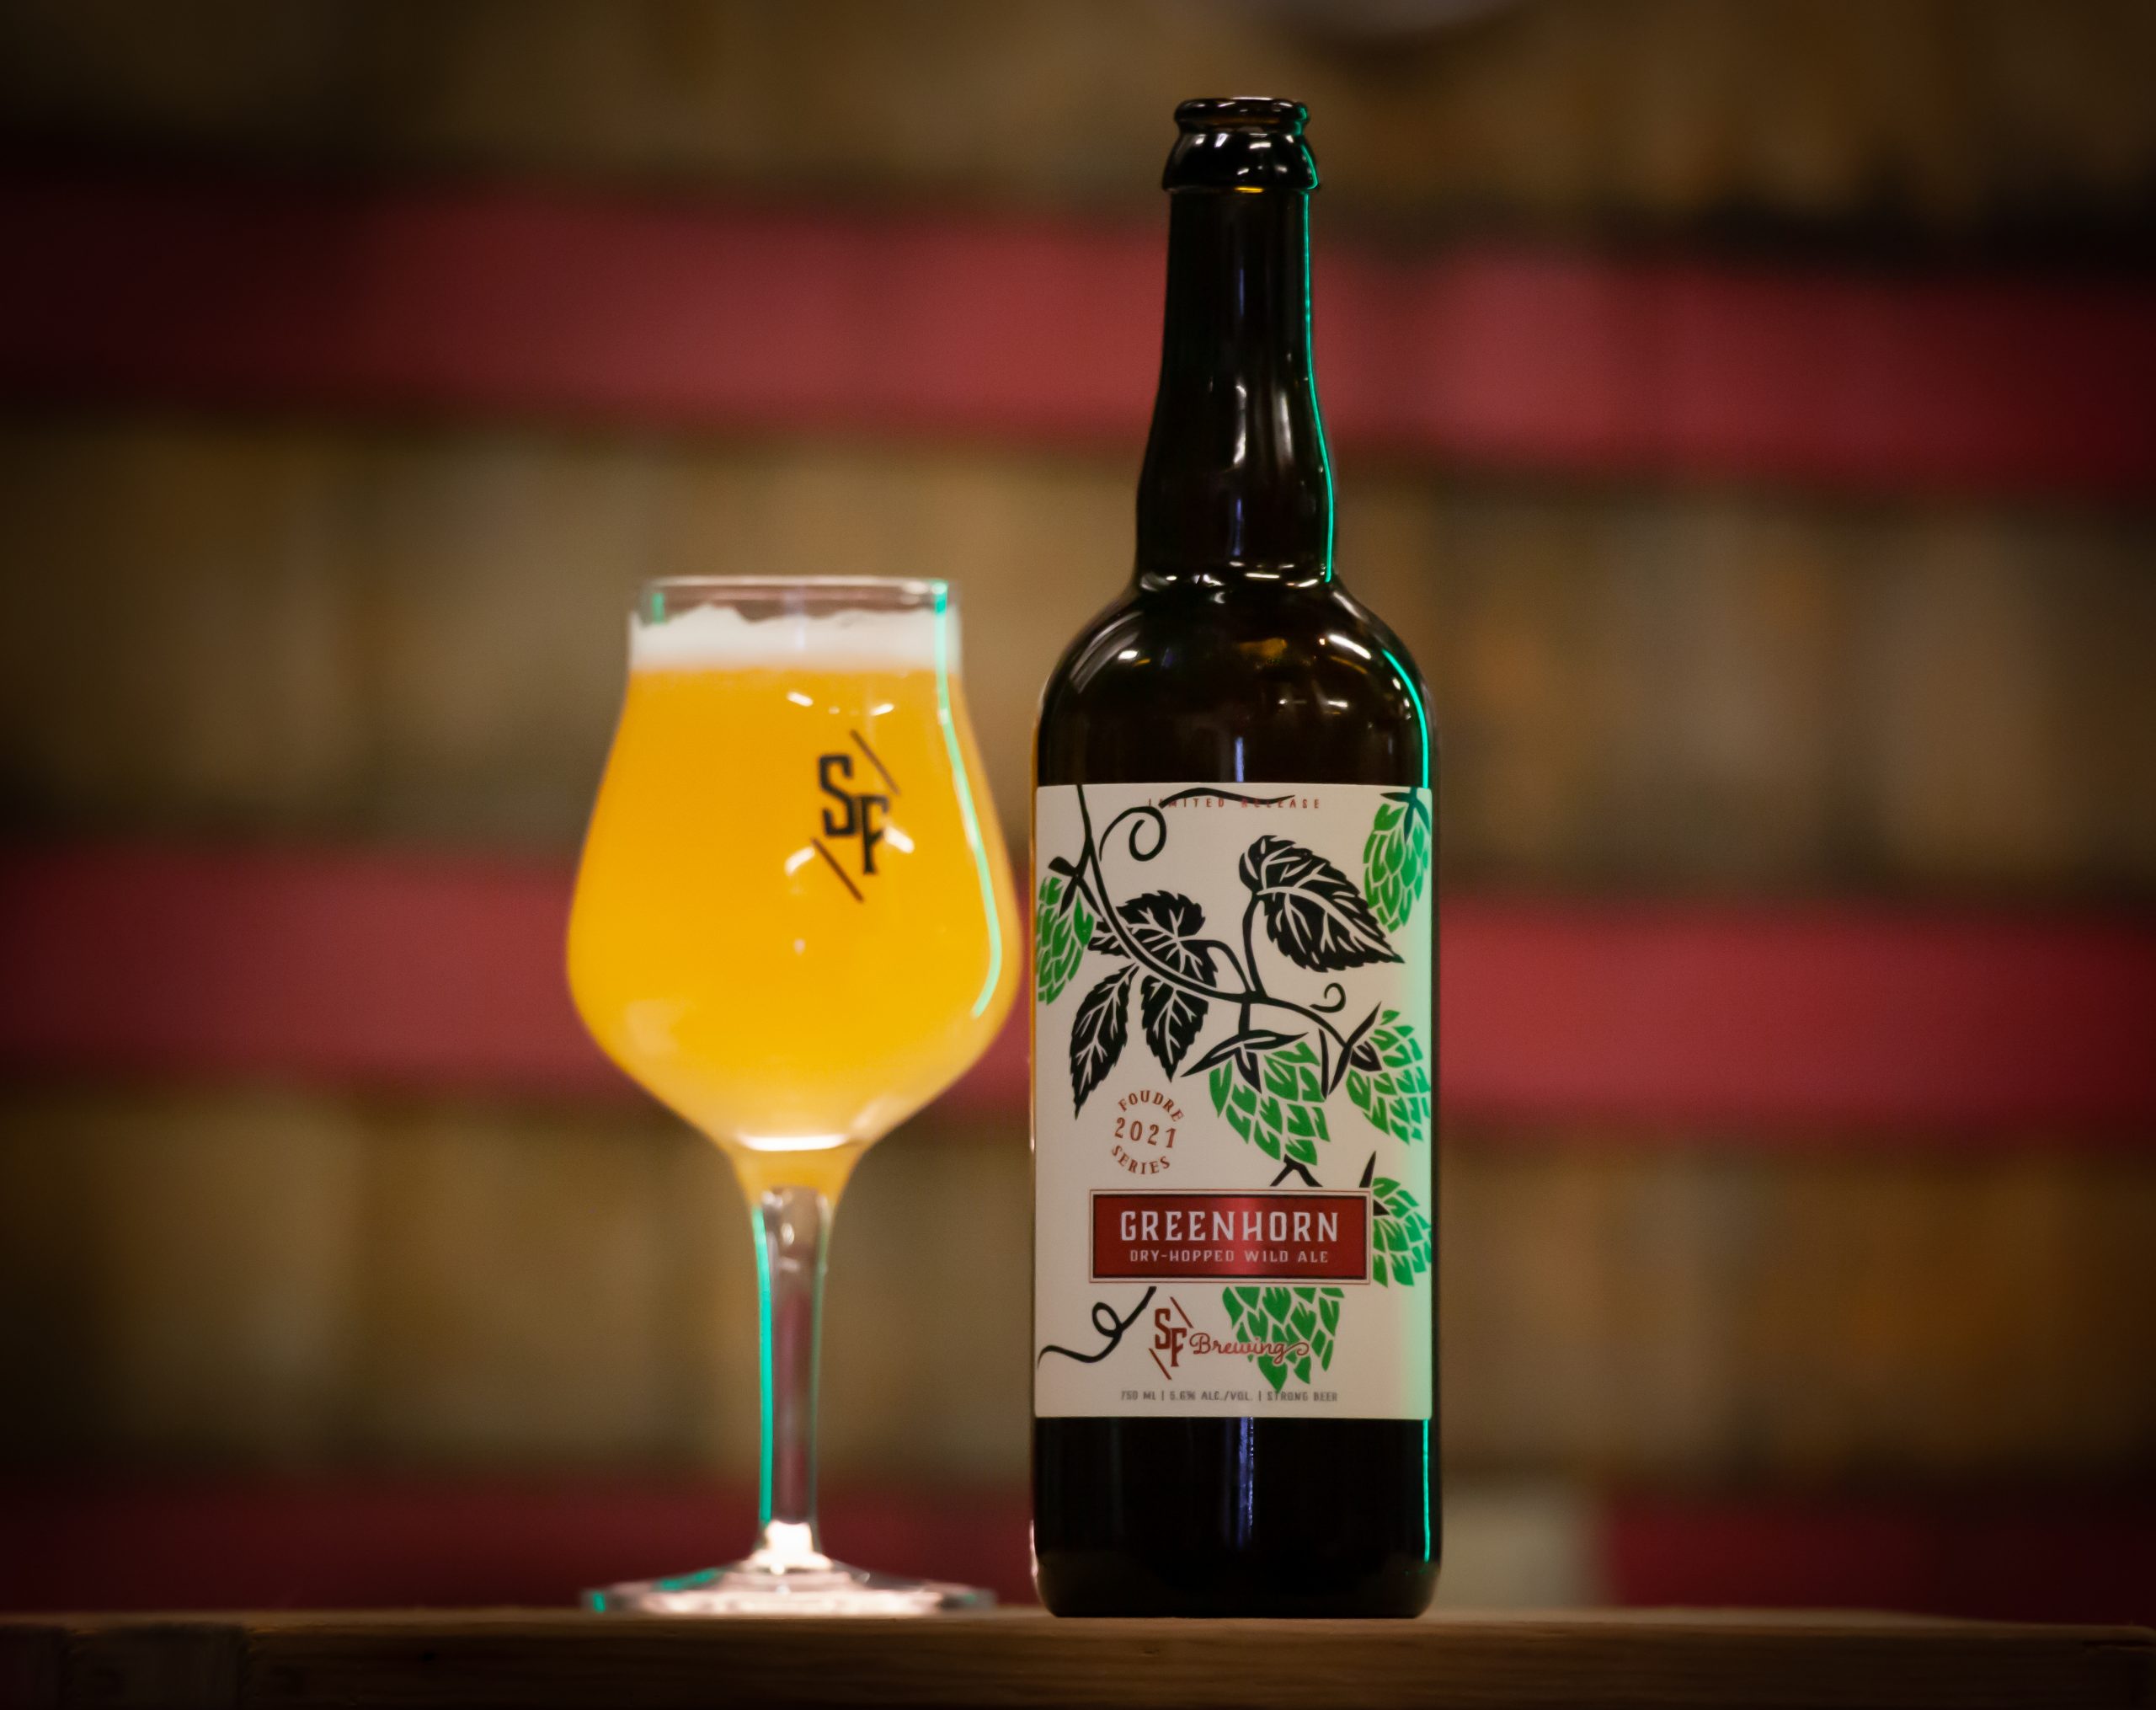 GREENHORN | FOUDRE AGED DRYHOPPED WILD ALE